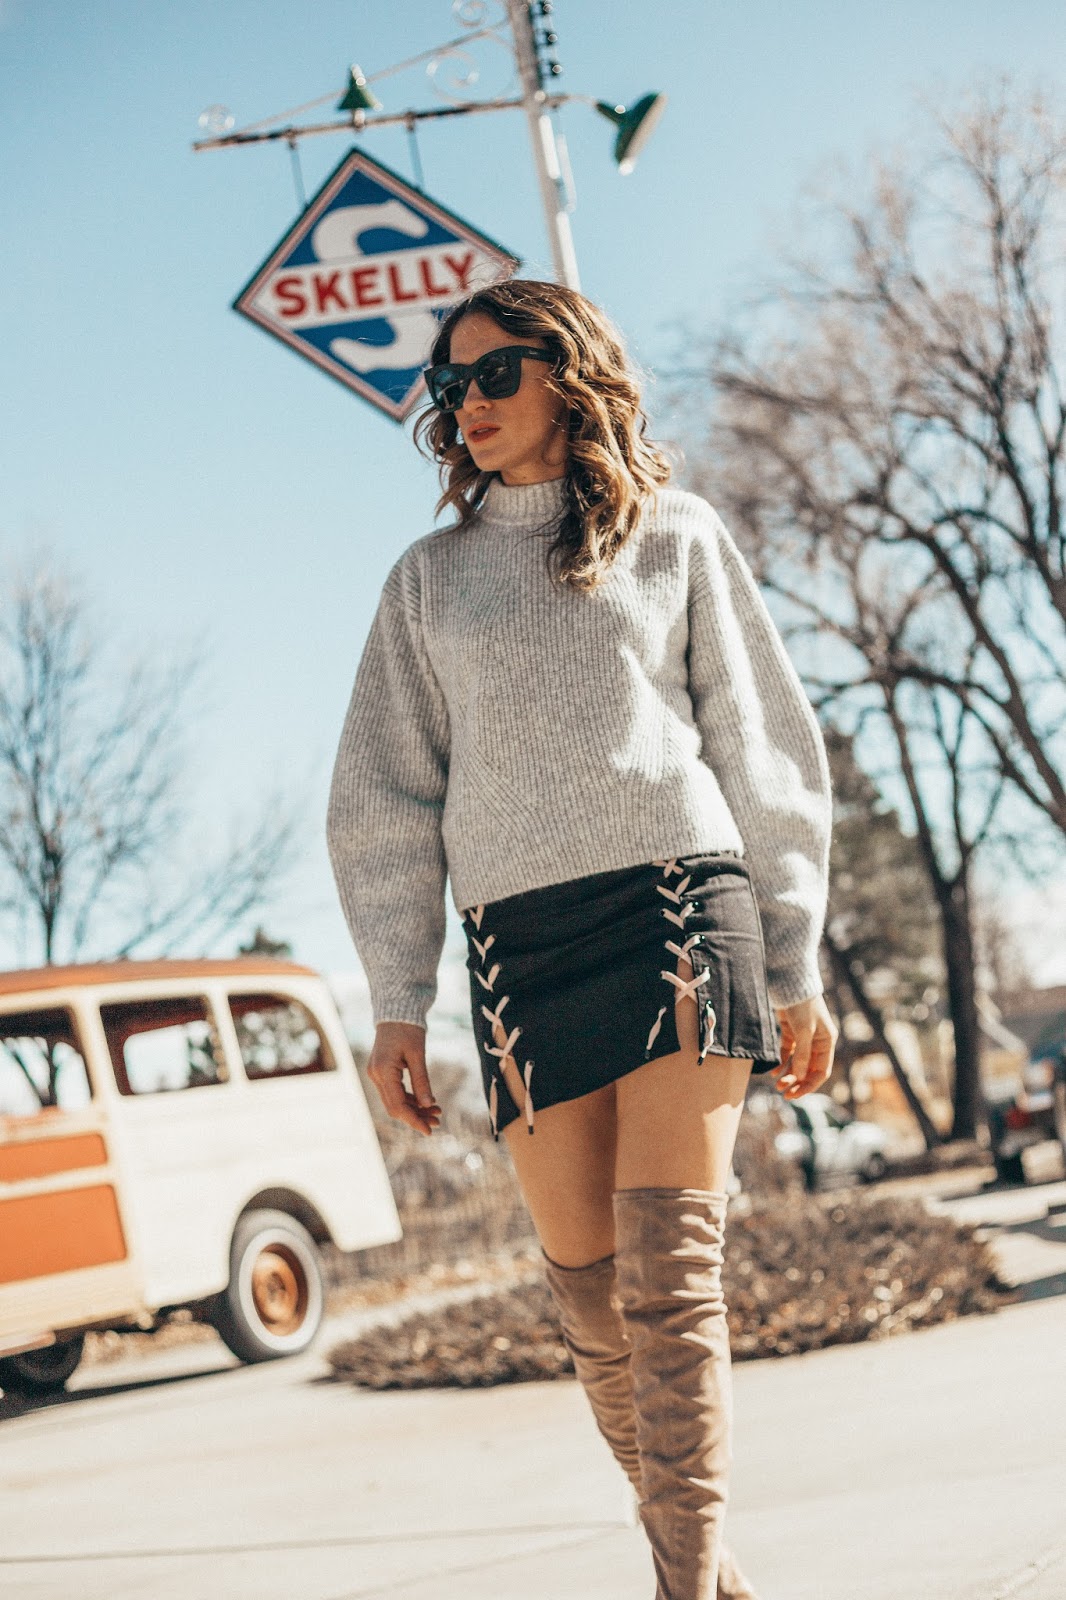 Skirt With Lacing & Sweater + OTK Boots by popular Colorado fashion blogger Eat Pray Wear Love